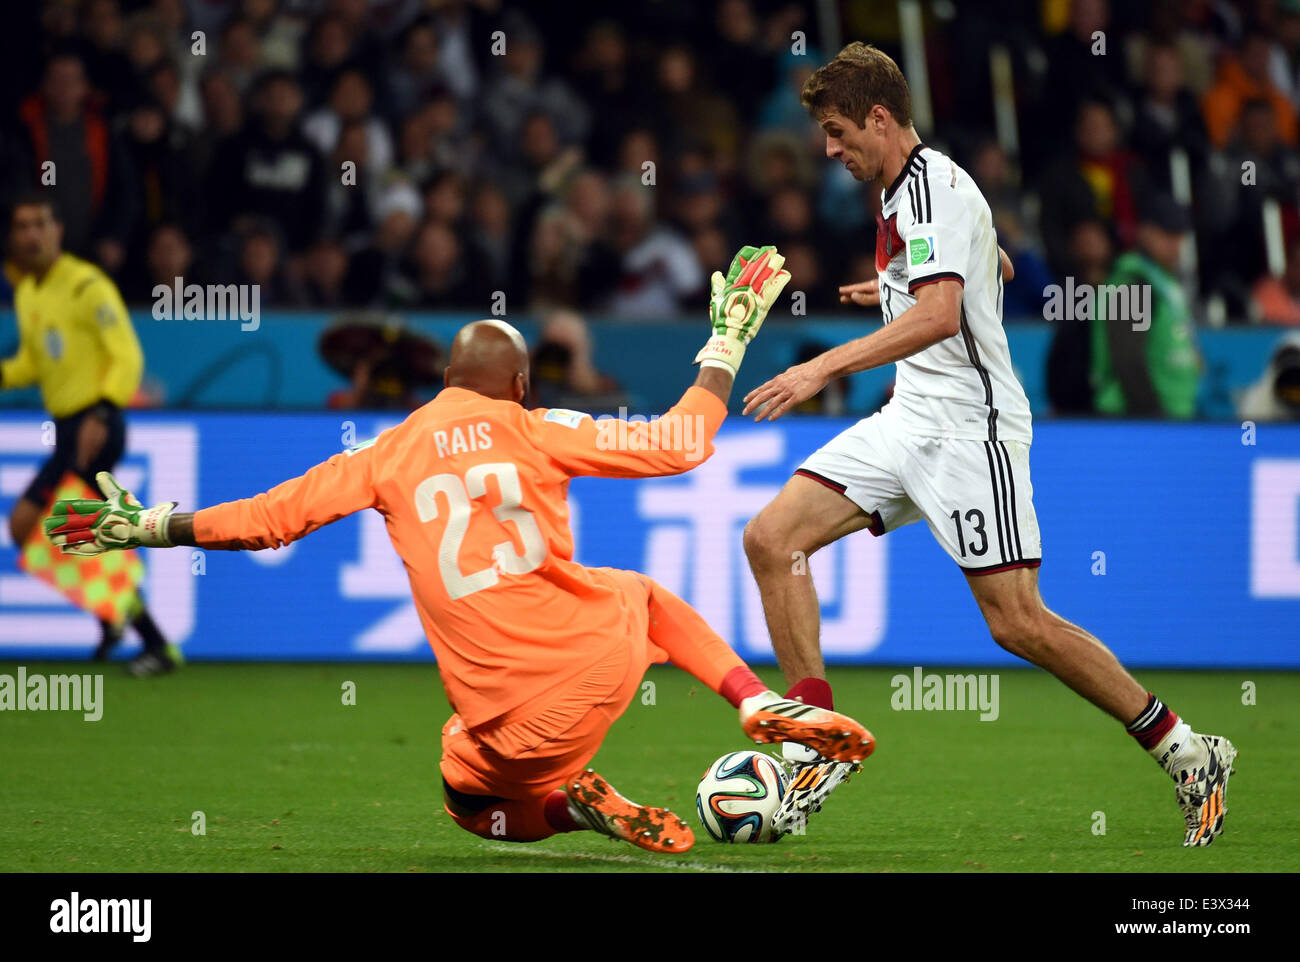 Porto Alegre, Brazil. 30th June, 2014. Germany's Thomas Muller (R) vies with Algeria's goalkeeper Rais Mbolhi during a Round of 16 match between Germany and Algeria of 2014 FIFA World Cup at the Estadio Beira-Rio Stadium in Porto Alegre, Brazil, on June 30, 2014. Germany won 2-1 over Algeria after 120 minutes and qualified for quarter-finals on Monday. Credit:  Li Ga/Xinhua/Alamy Live News Stock Photo